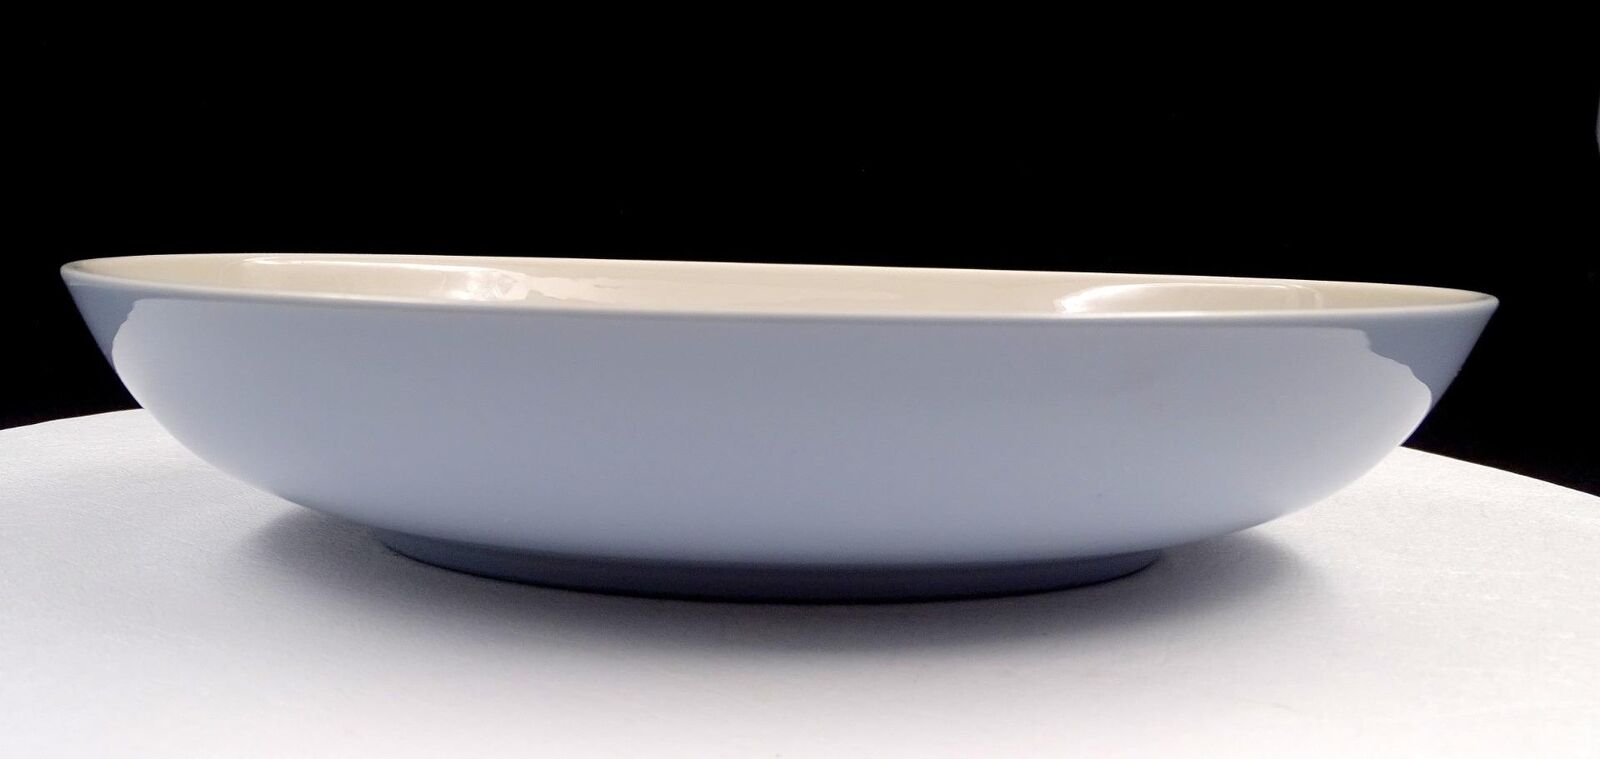 Franciscan Usa Twilight Blue And White Oval 8 7/8" Vegetable Bowl 1950's